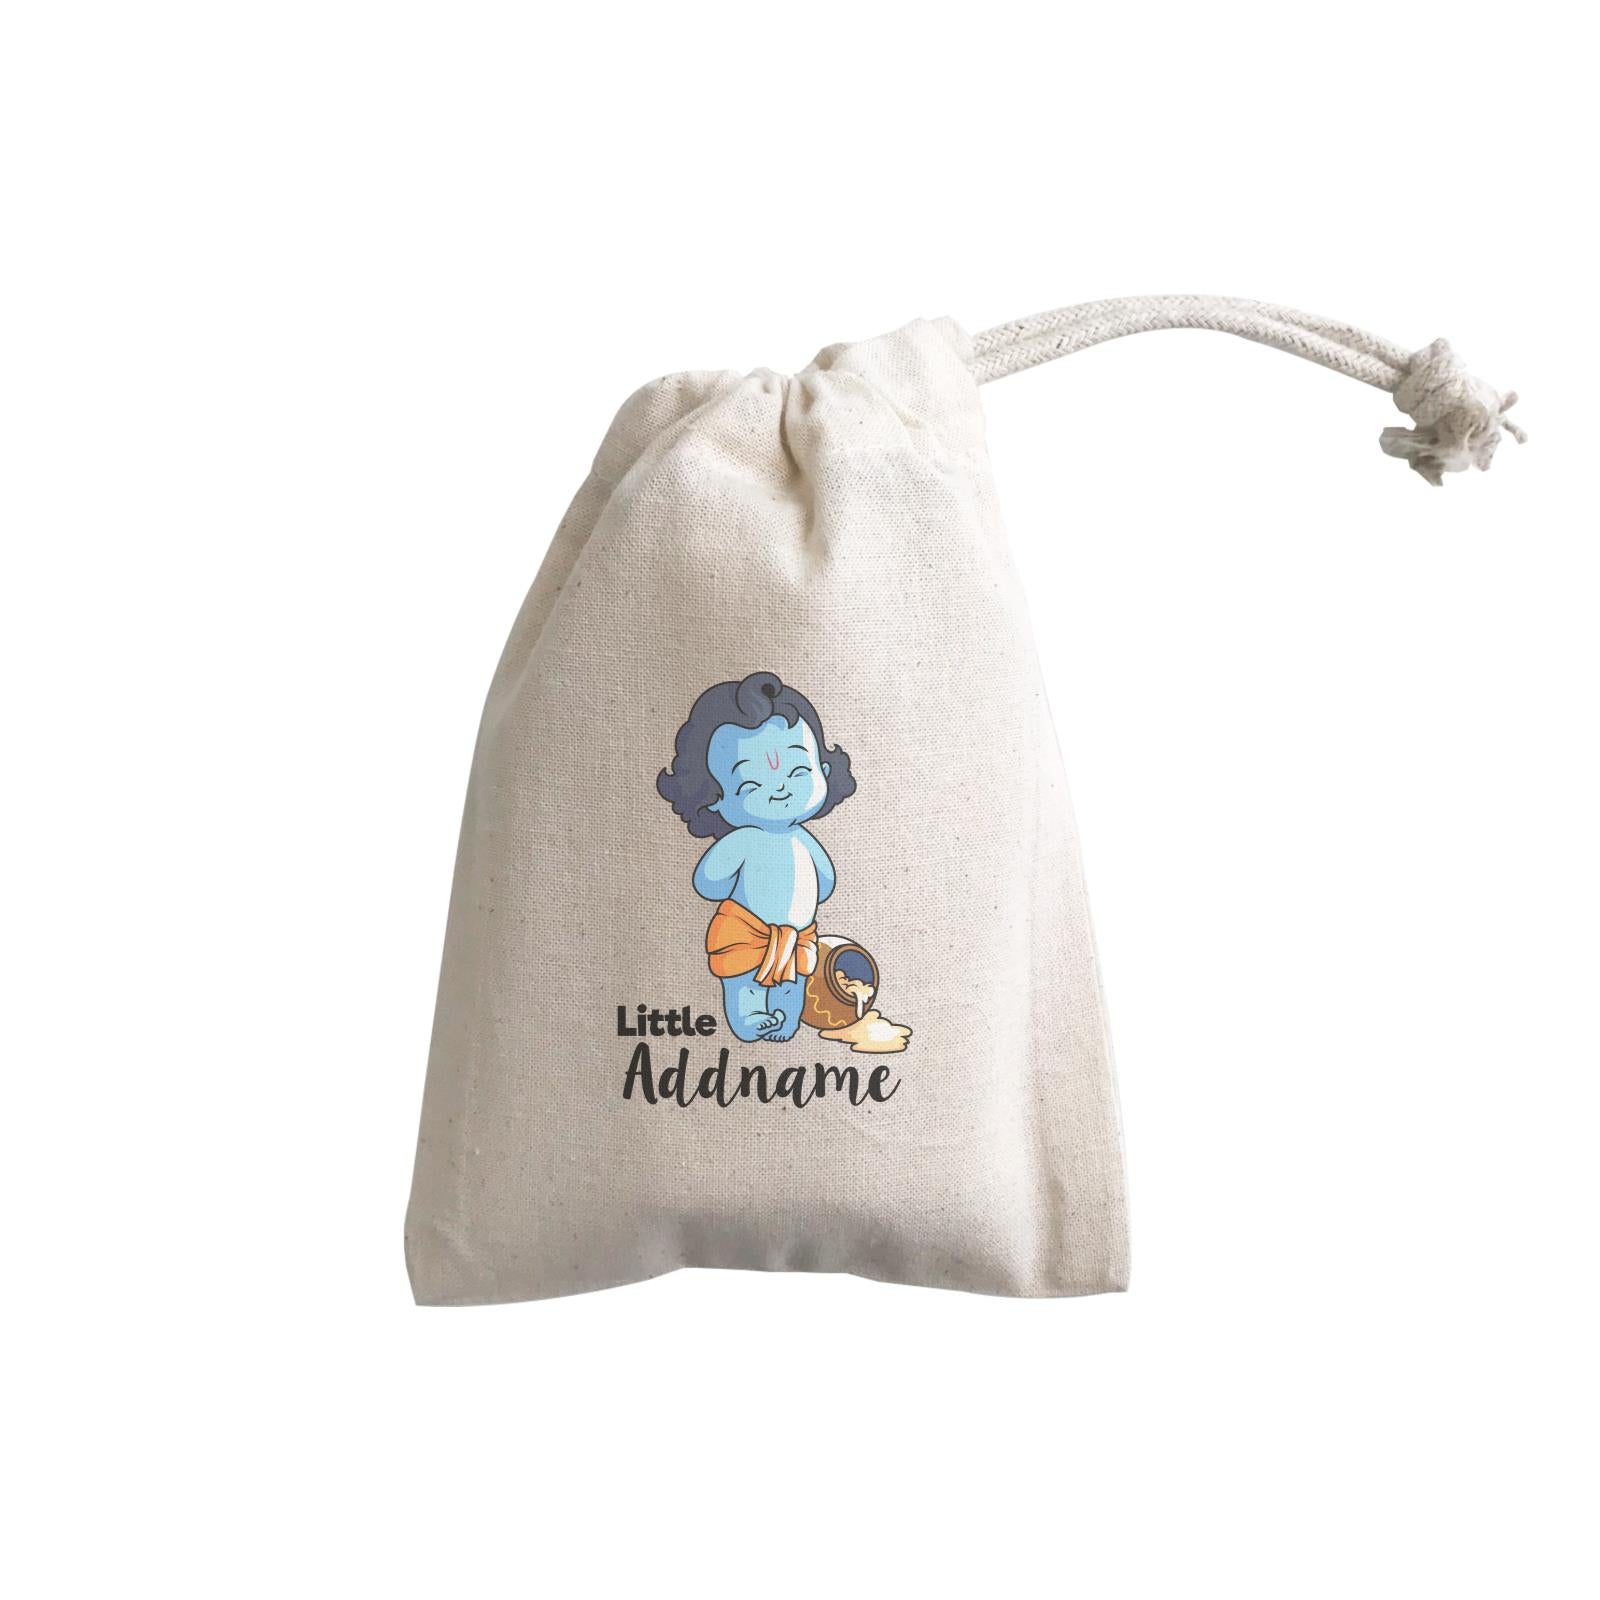 Cute Krishna Standing Little Addname GP Gift Pouch